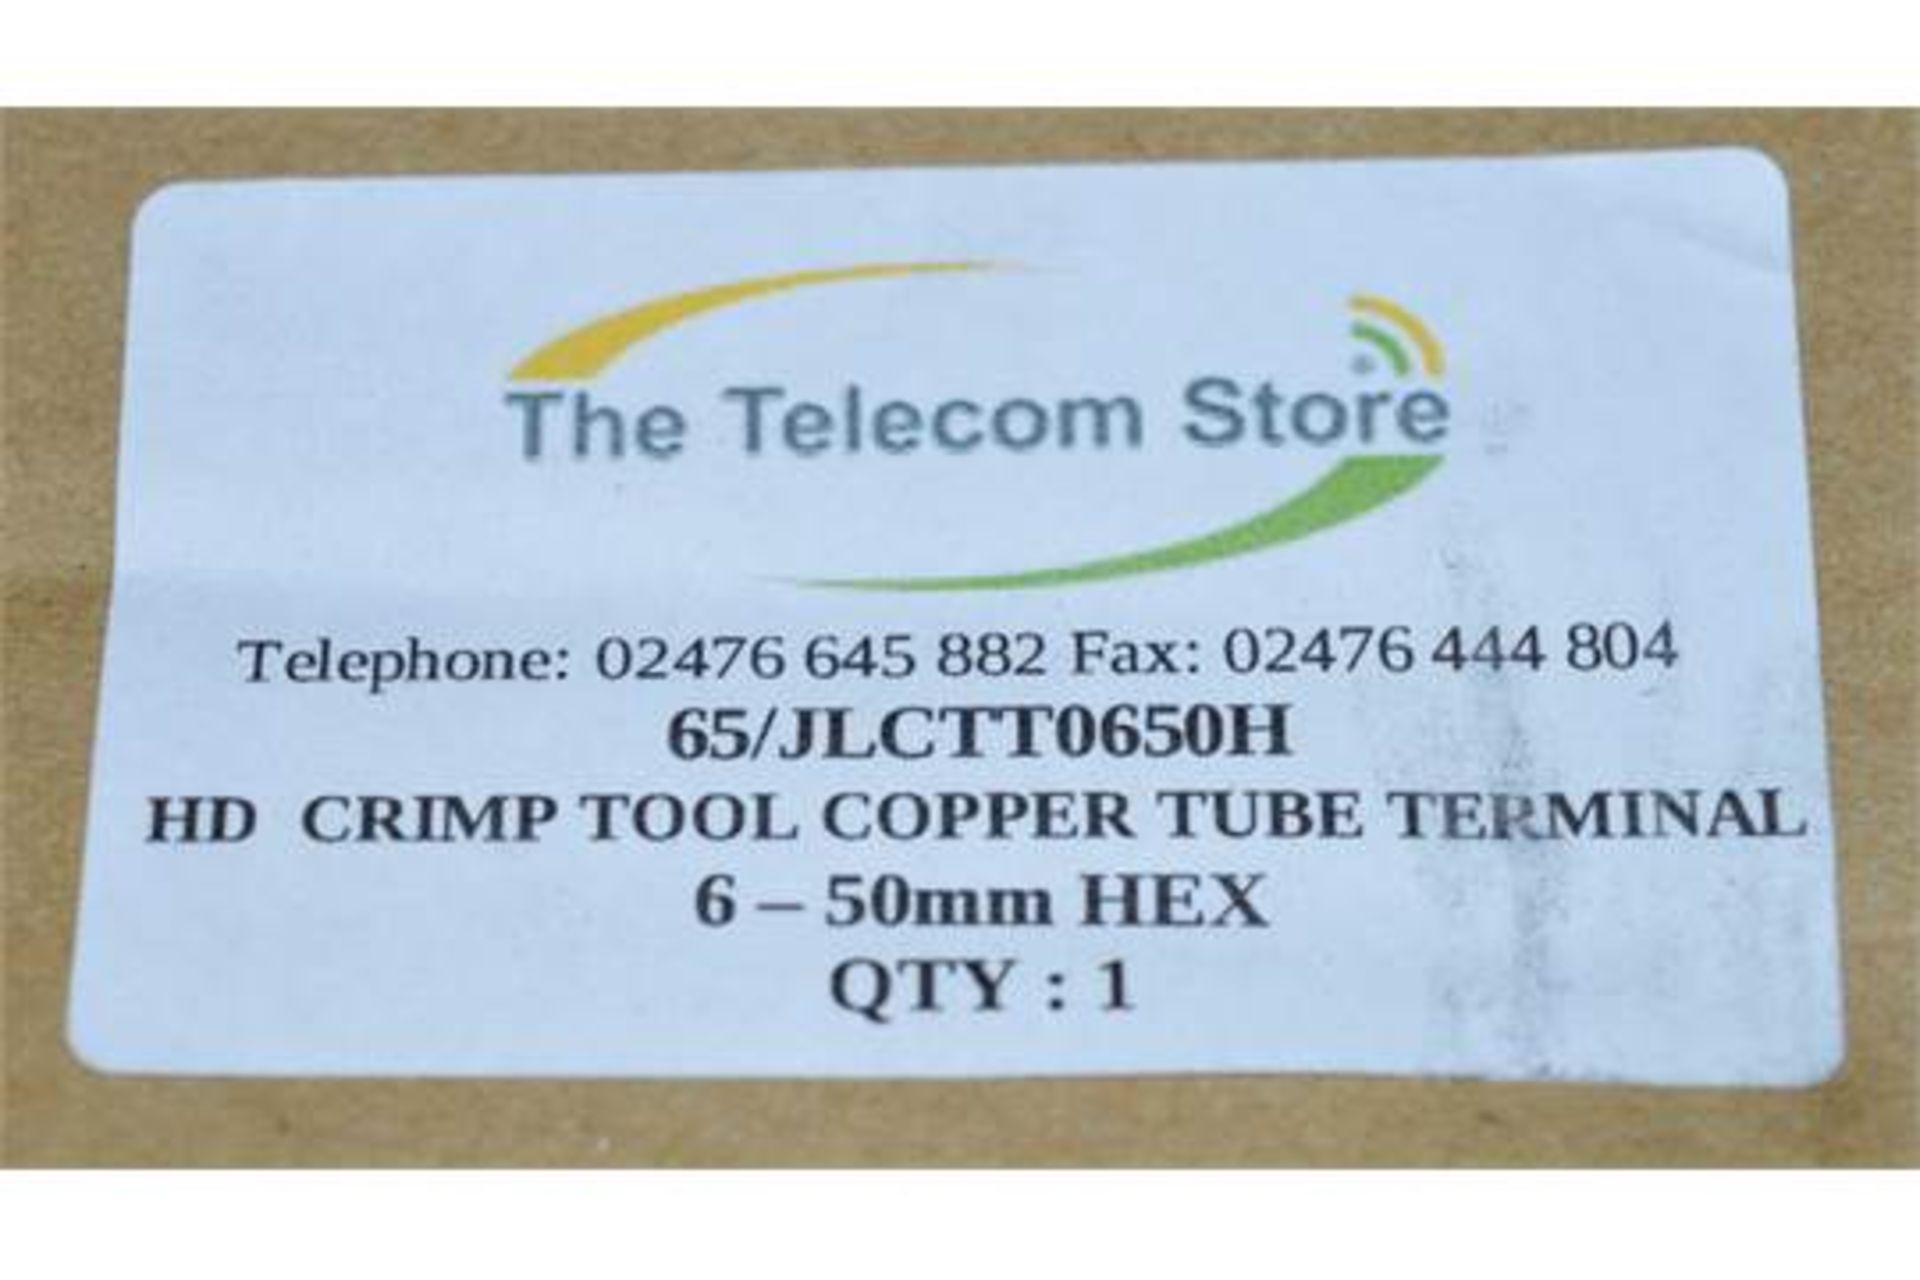 1 x HD Copper Tube Terminal Crimp Tool With Adjustable Hex - 38cm Length - XXX Branded - New and - Image 5 of 10